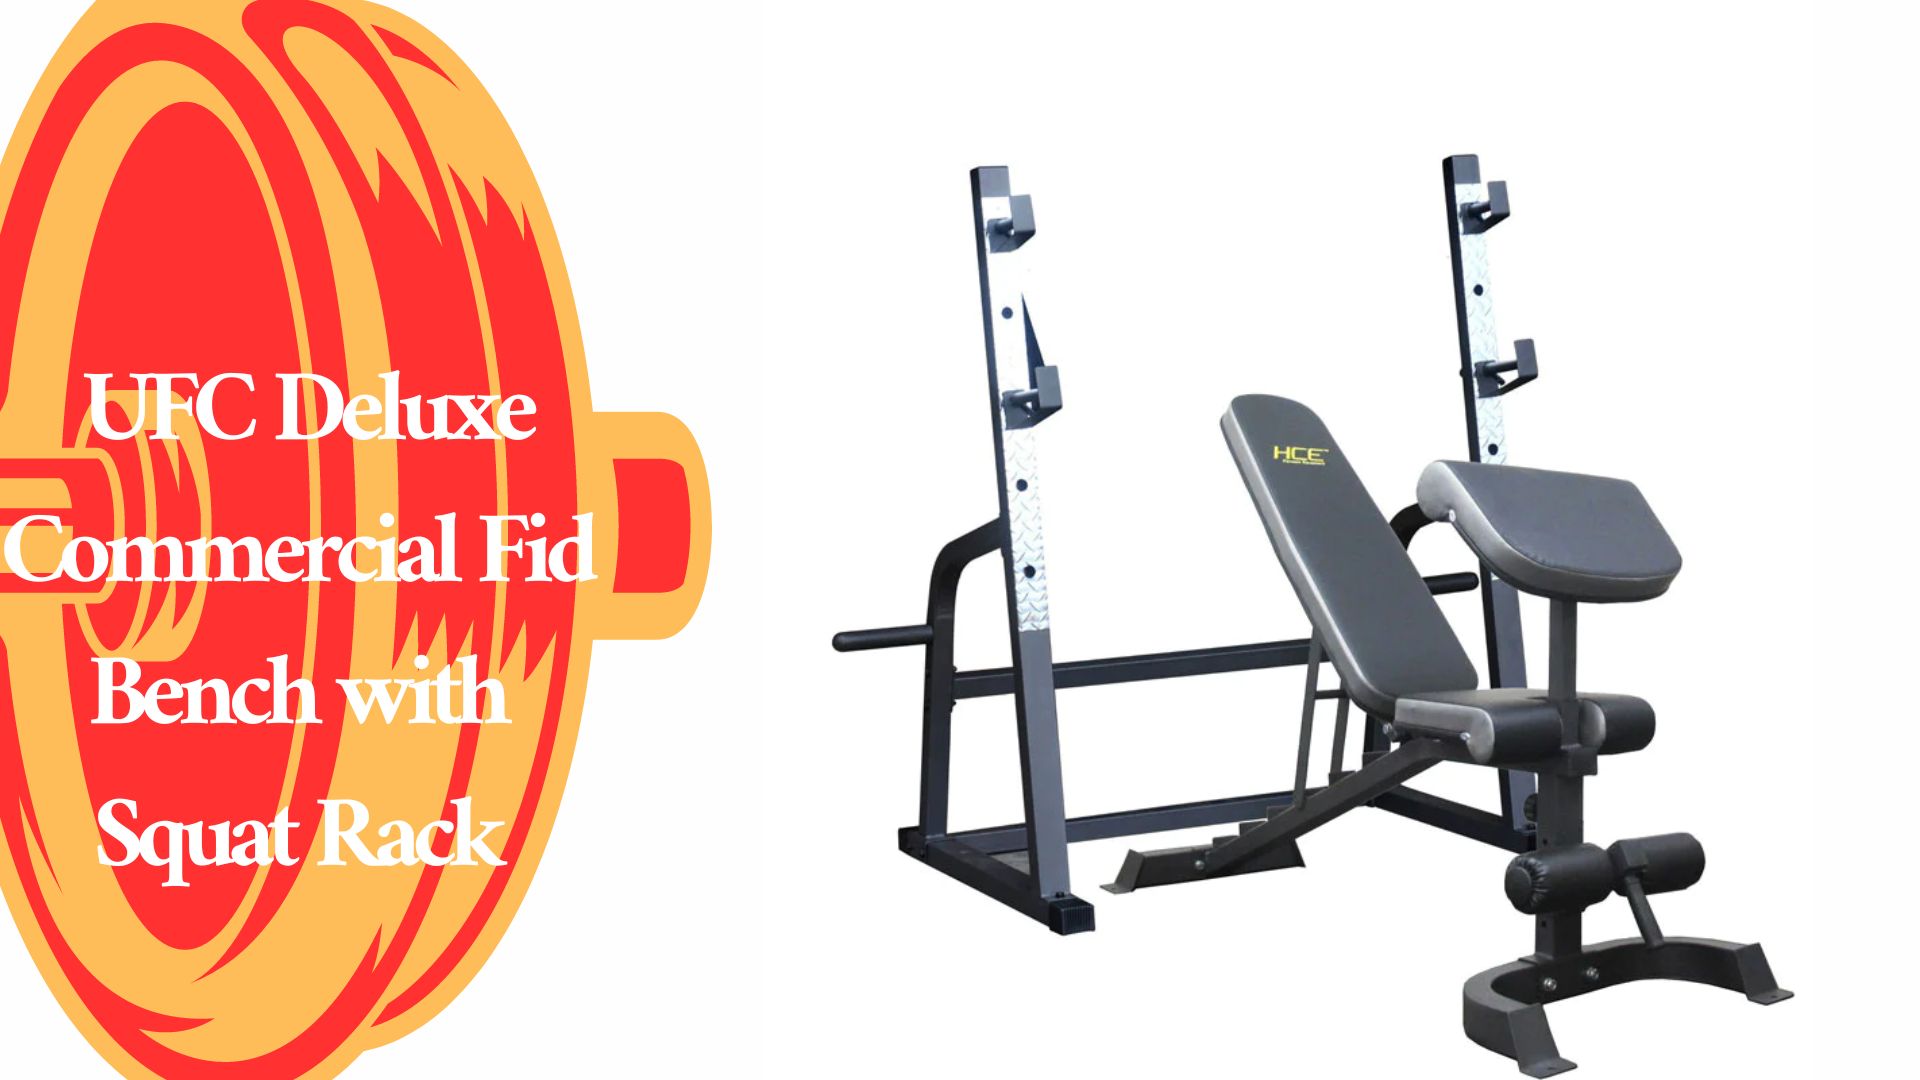 UFC Deluxe Commercial Fid Bench With Squat Rack Review